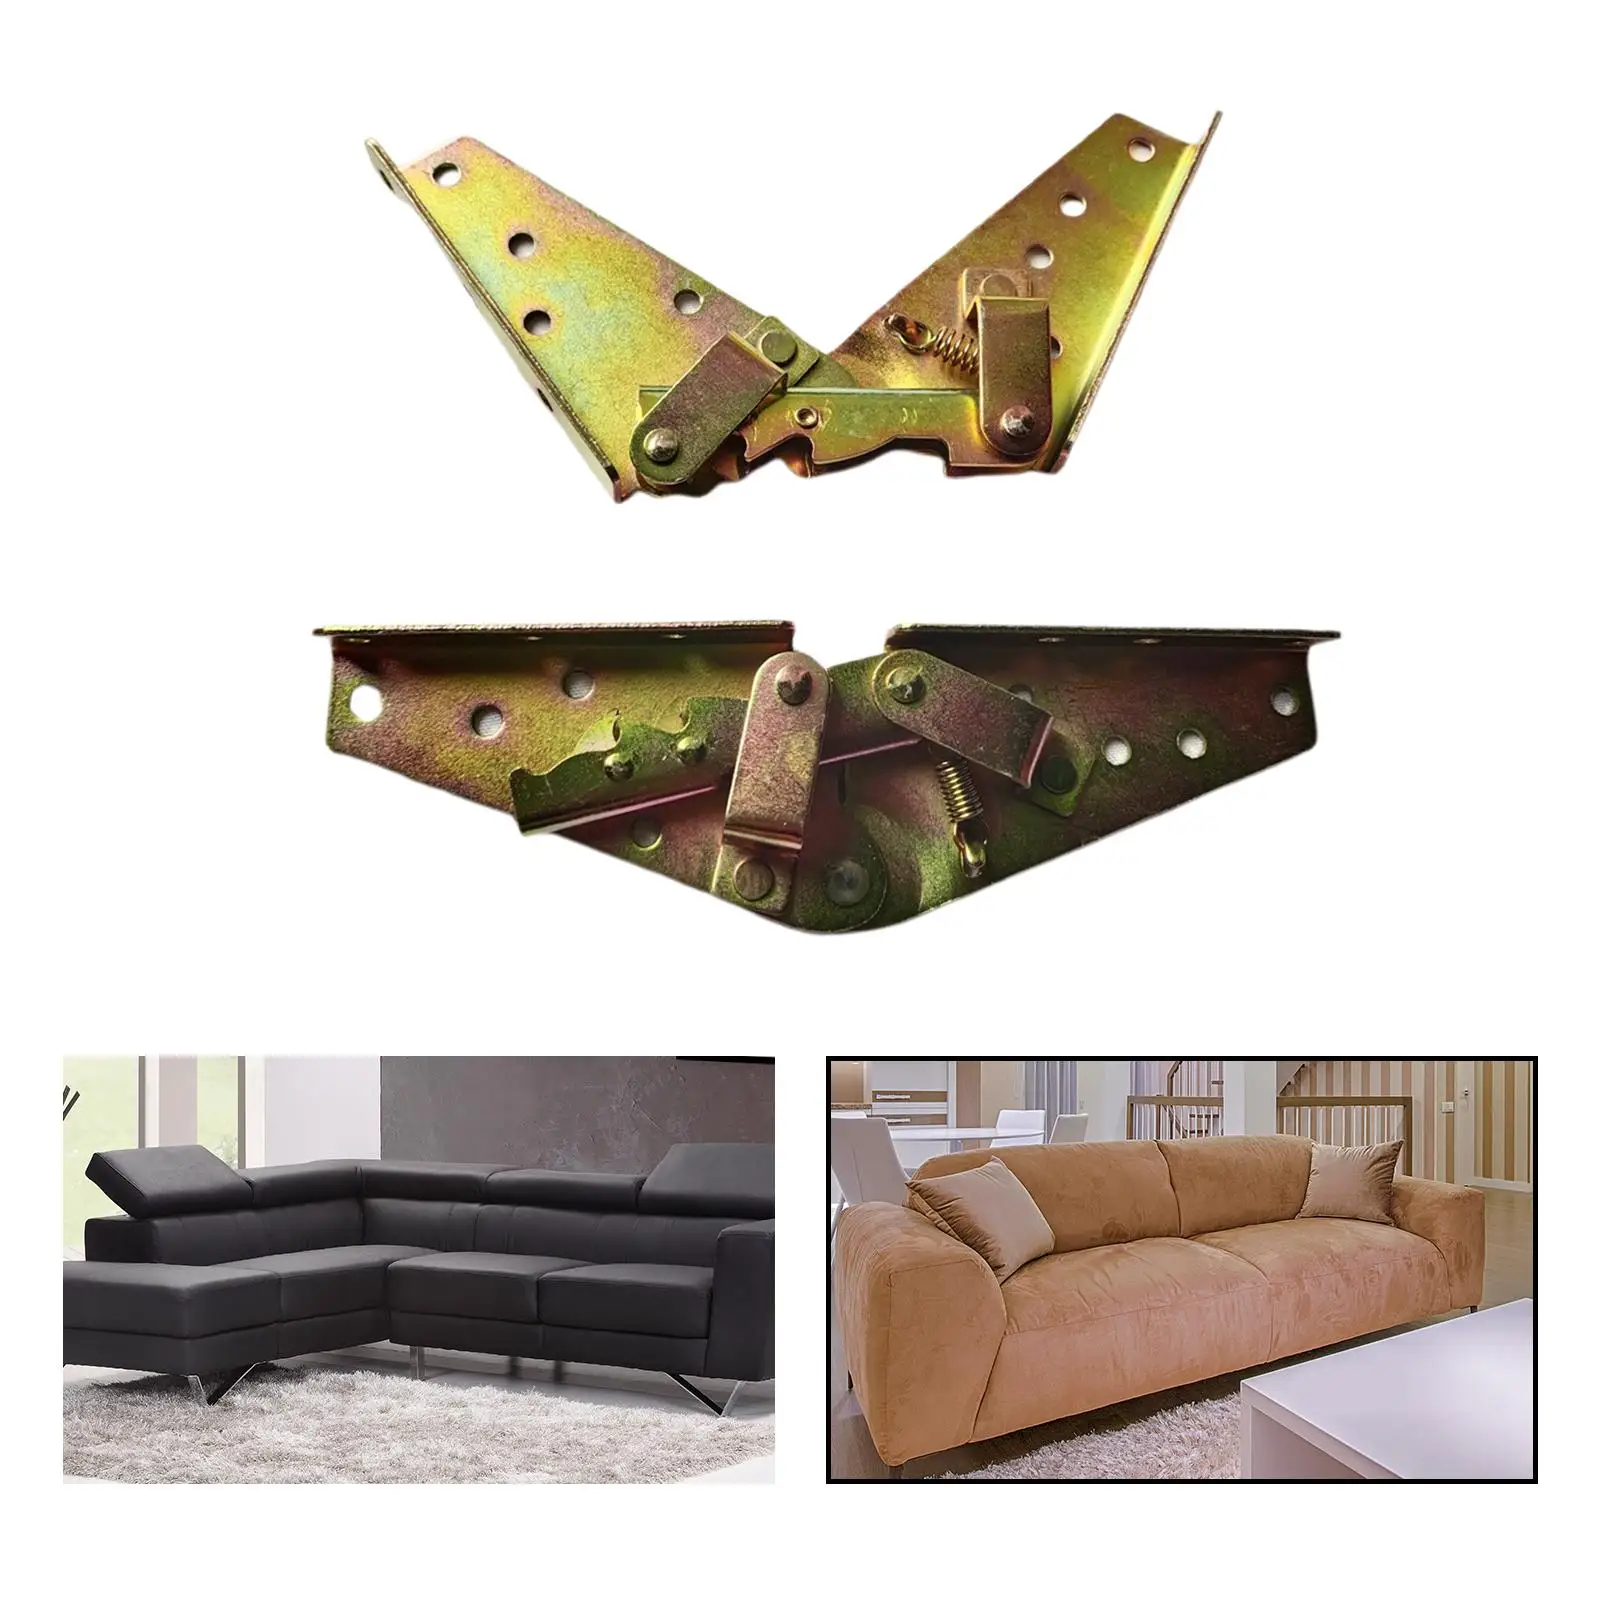 Adjustable Sofa Backrest Hinge Practical Sturdy Durable Heavy Duty for Home